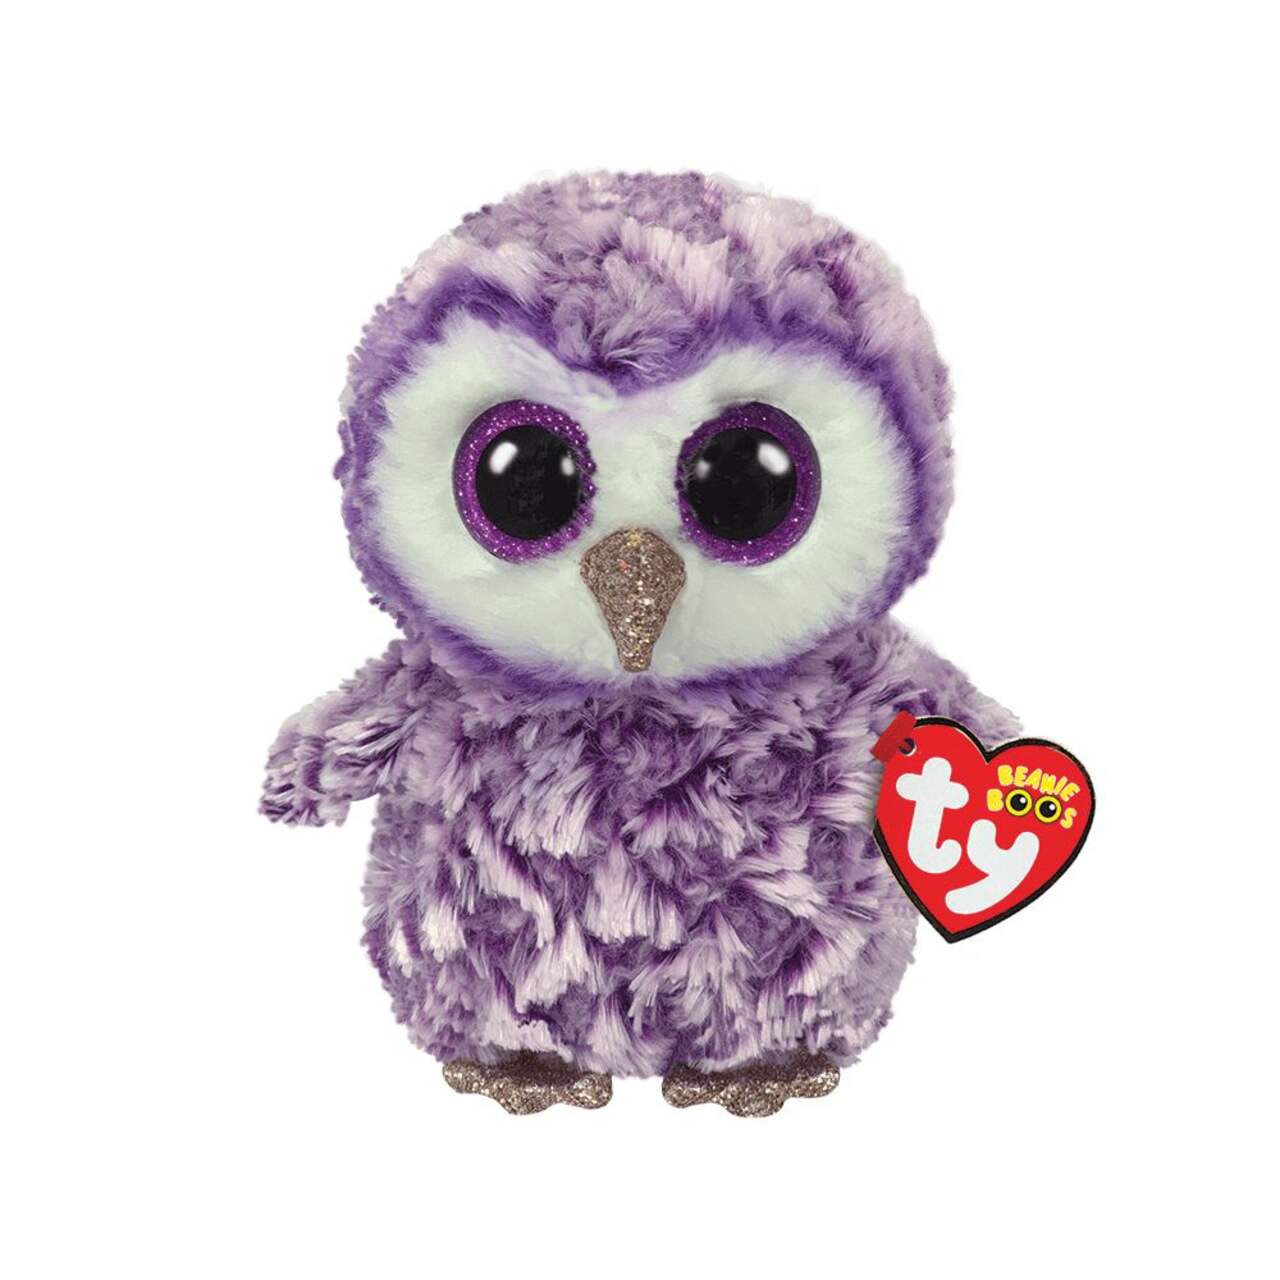 Ty Beanie Boos® Regular Recognizable Character Plush Animal Stuffed Toy,  Moonlight the Purple Owl, Ages 3+